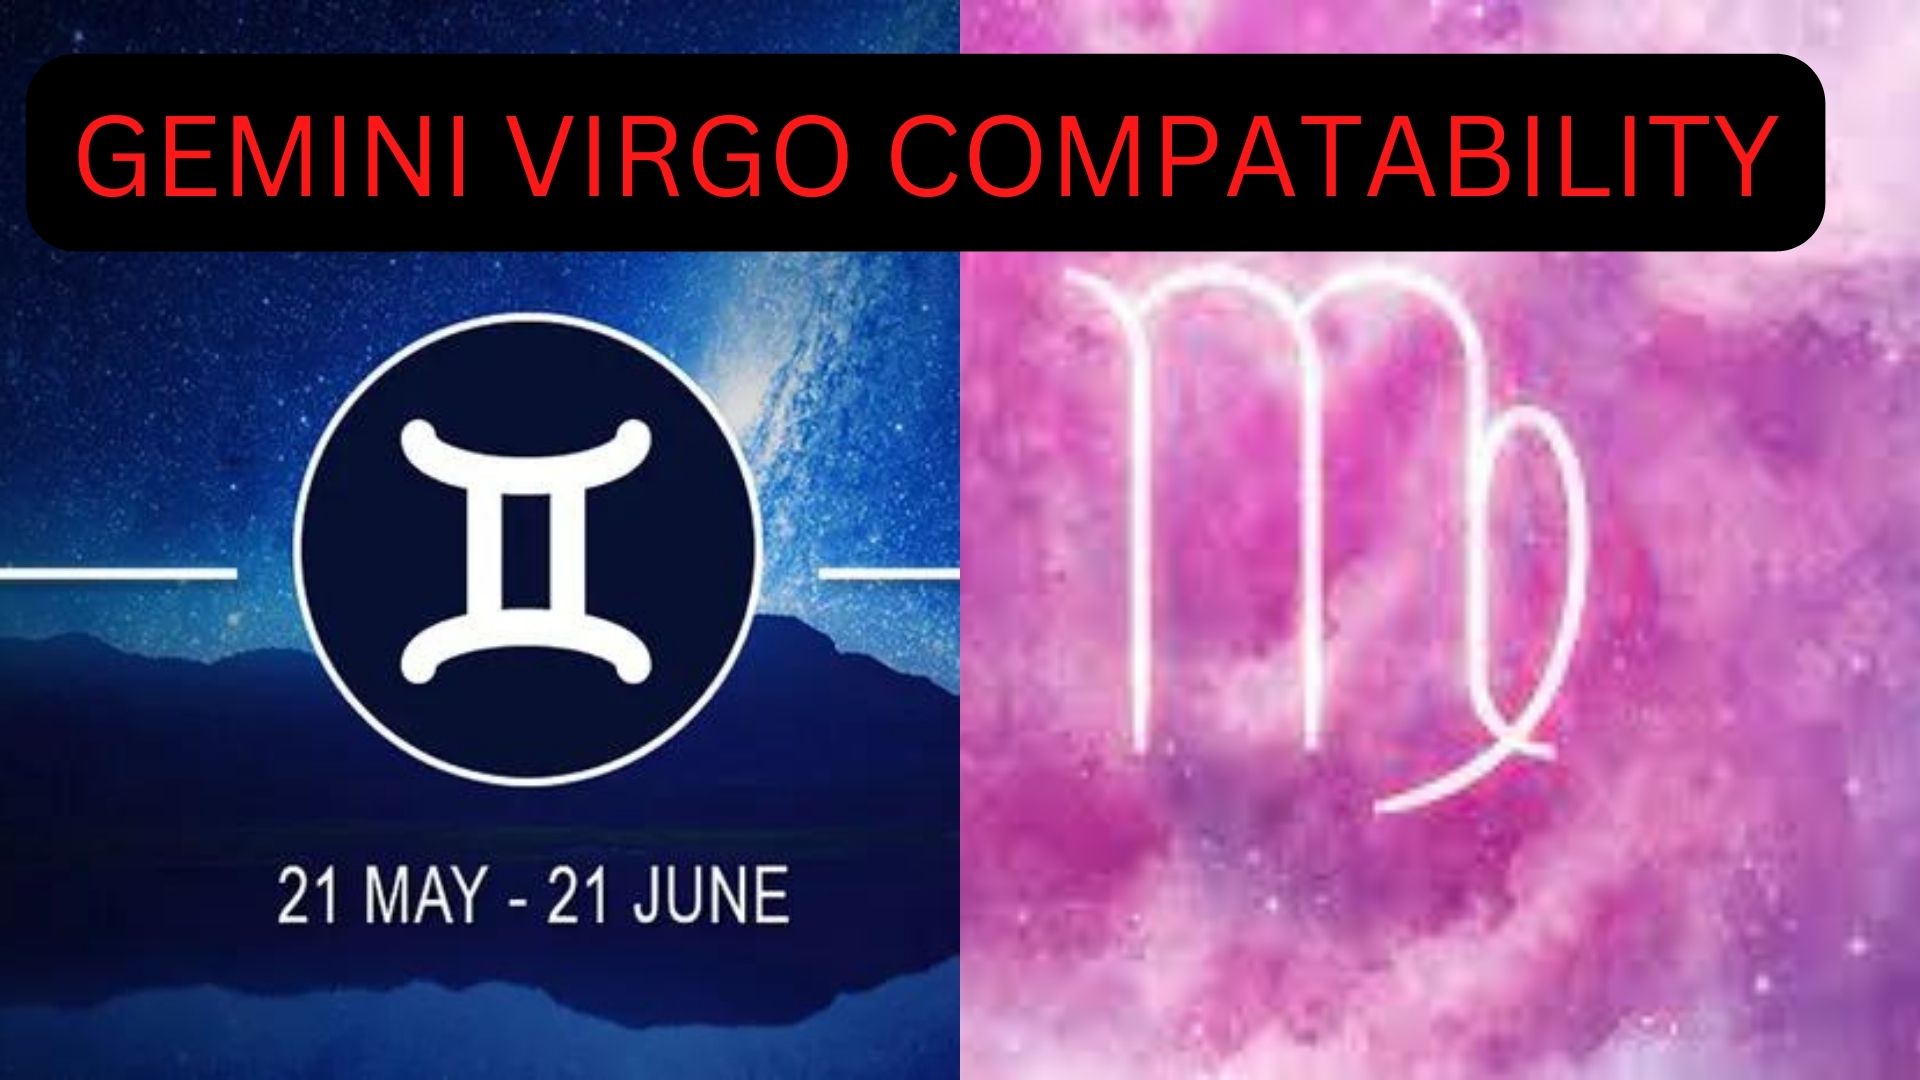 Gemini Virgo Compatability - Can Change As The Wind